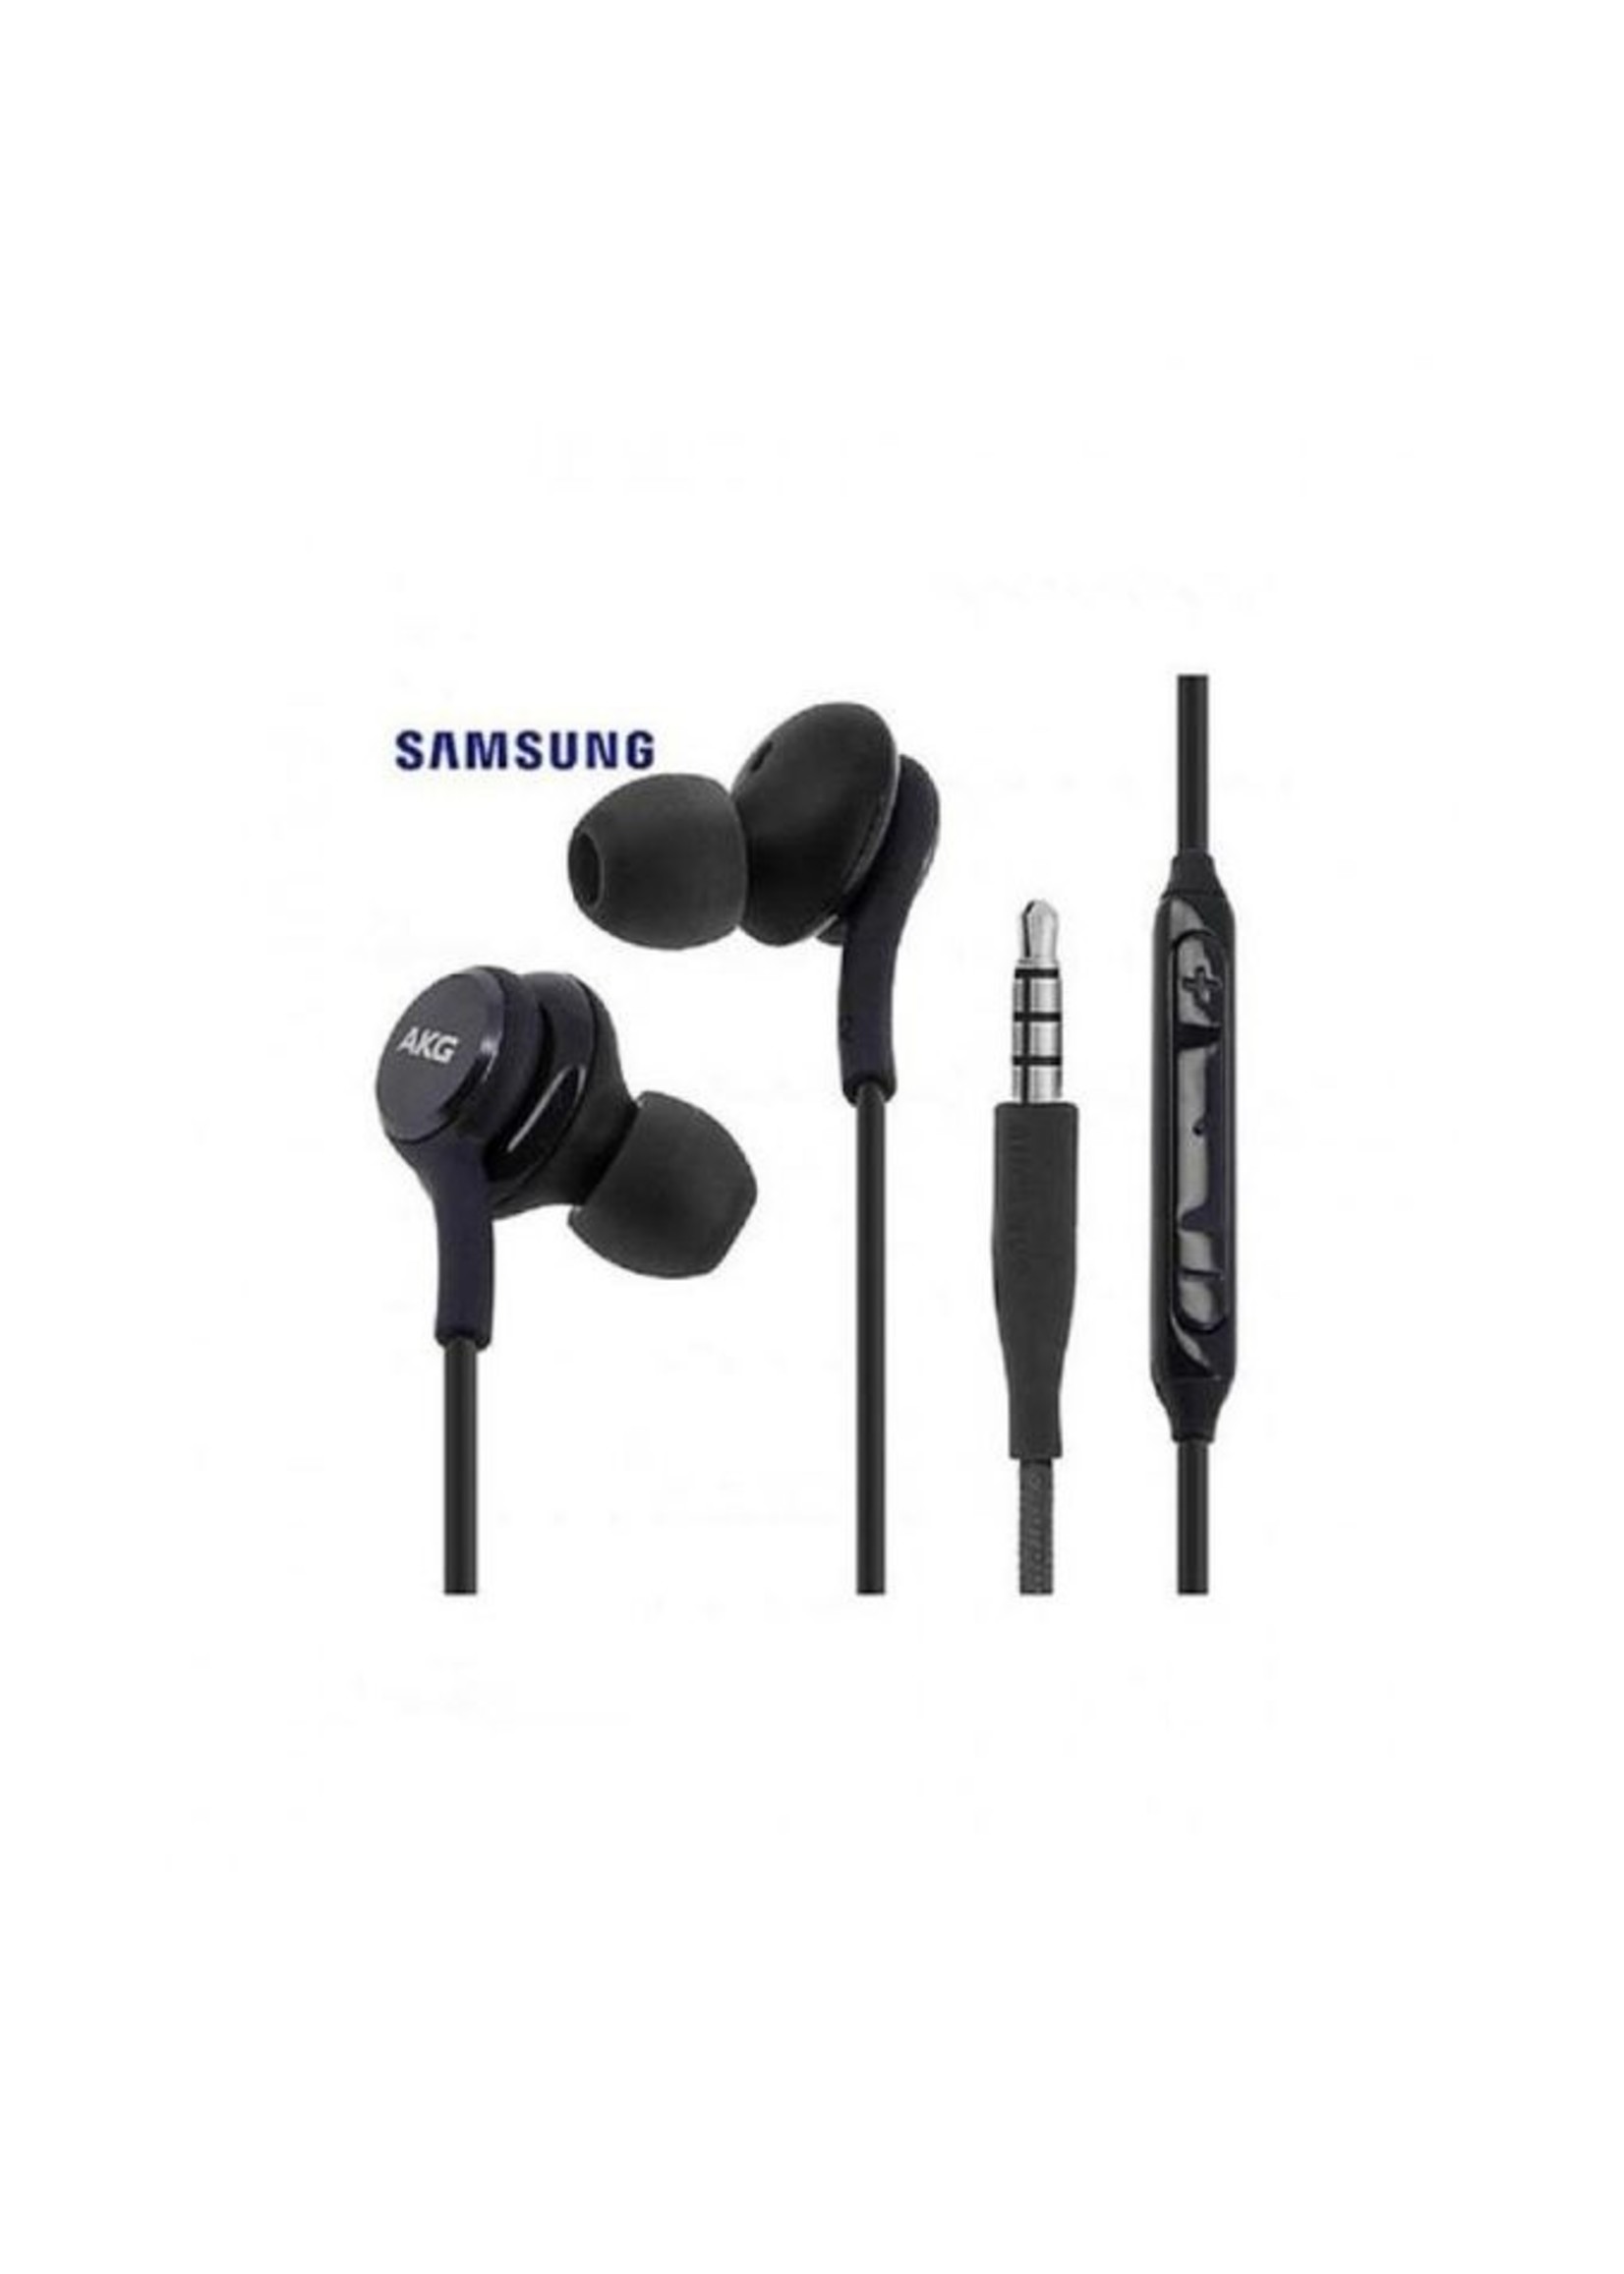 S10+/Note 10+ Style Earbuds w/Mic